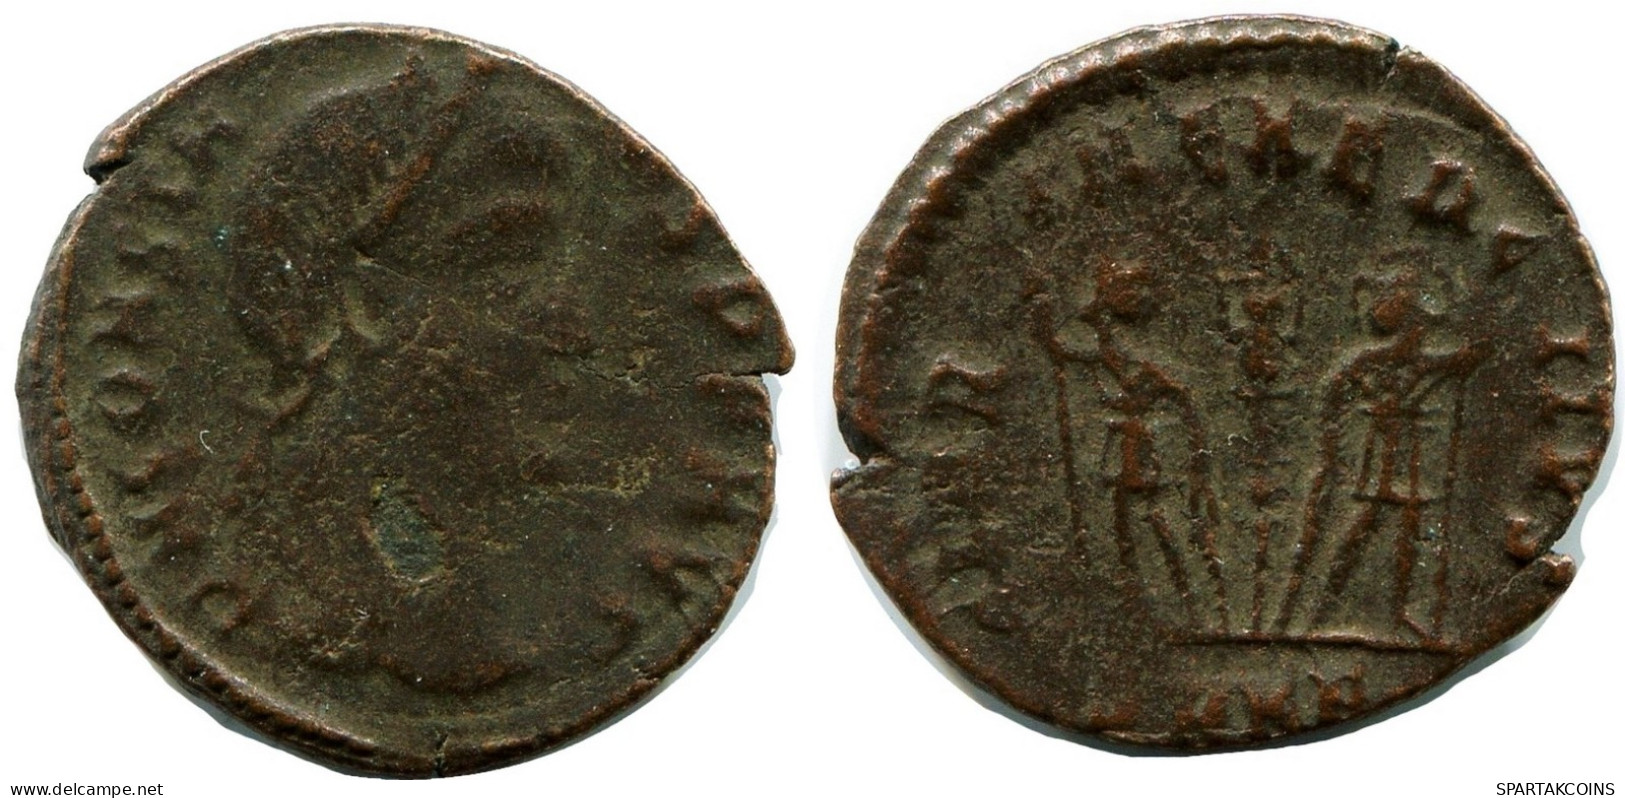 CONSTANS MINTED IN CYZICUS FROM THE ROYAL ONTARIO MUSEUM #ANC11676.14.U.A - Der Christlischen Kaiser (307 / 363)